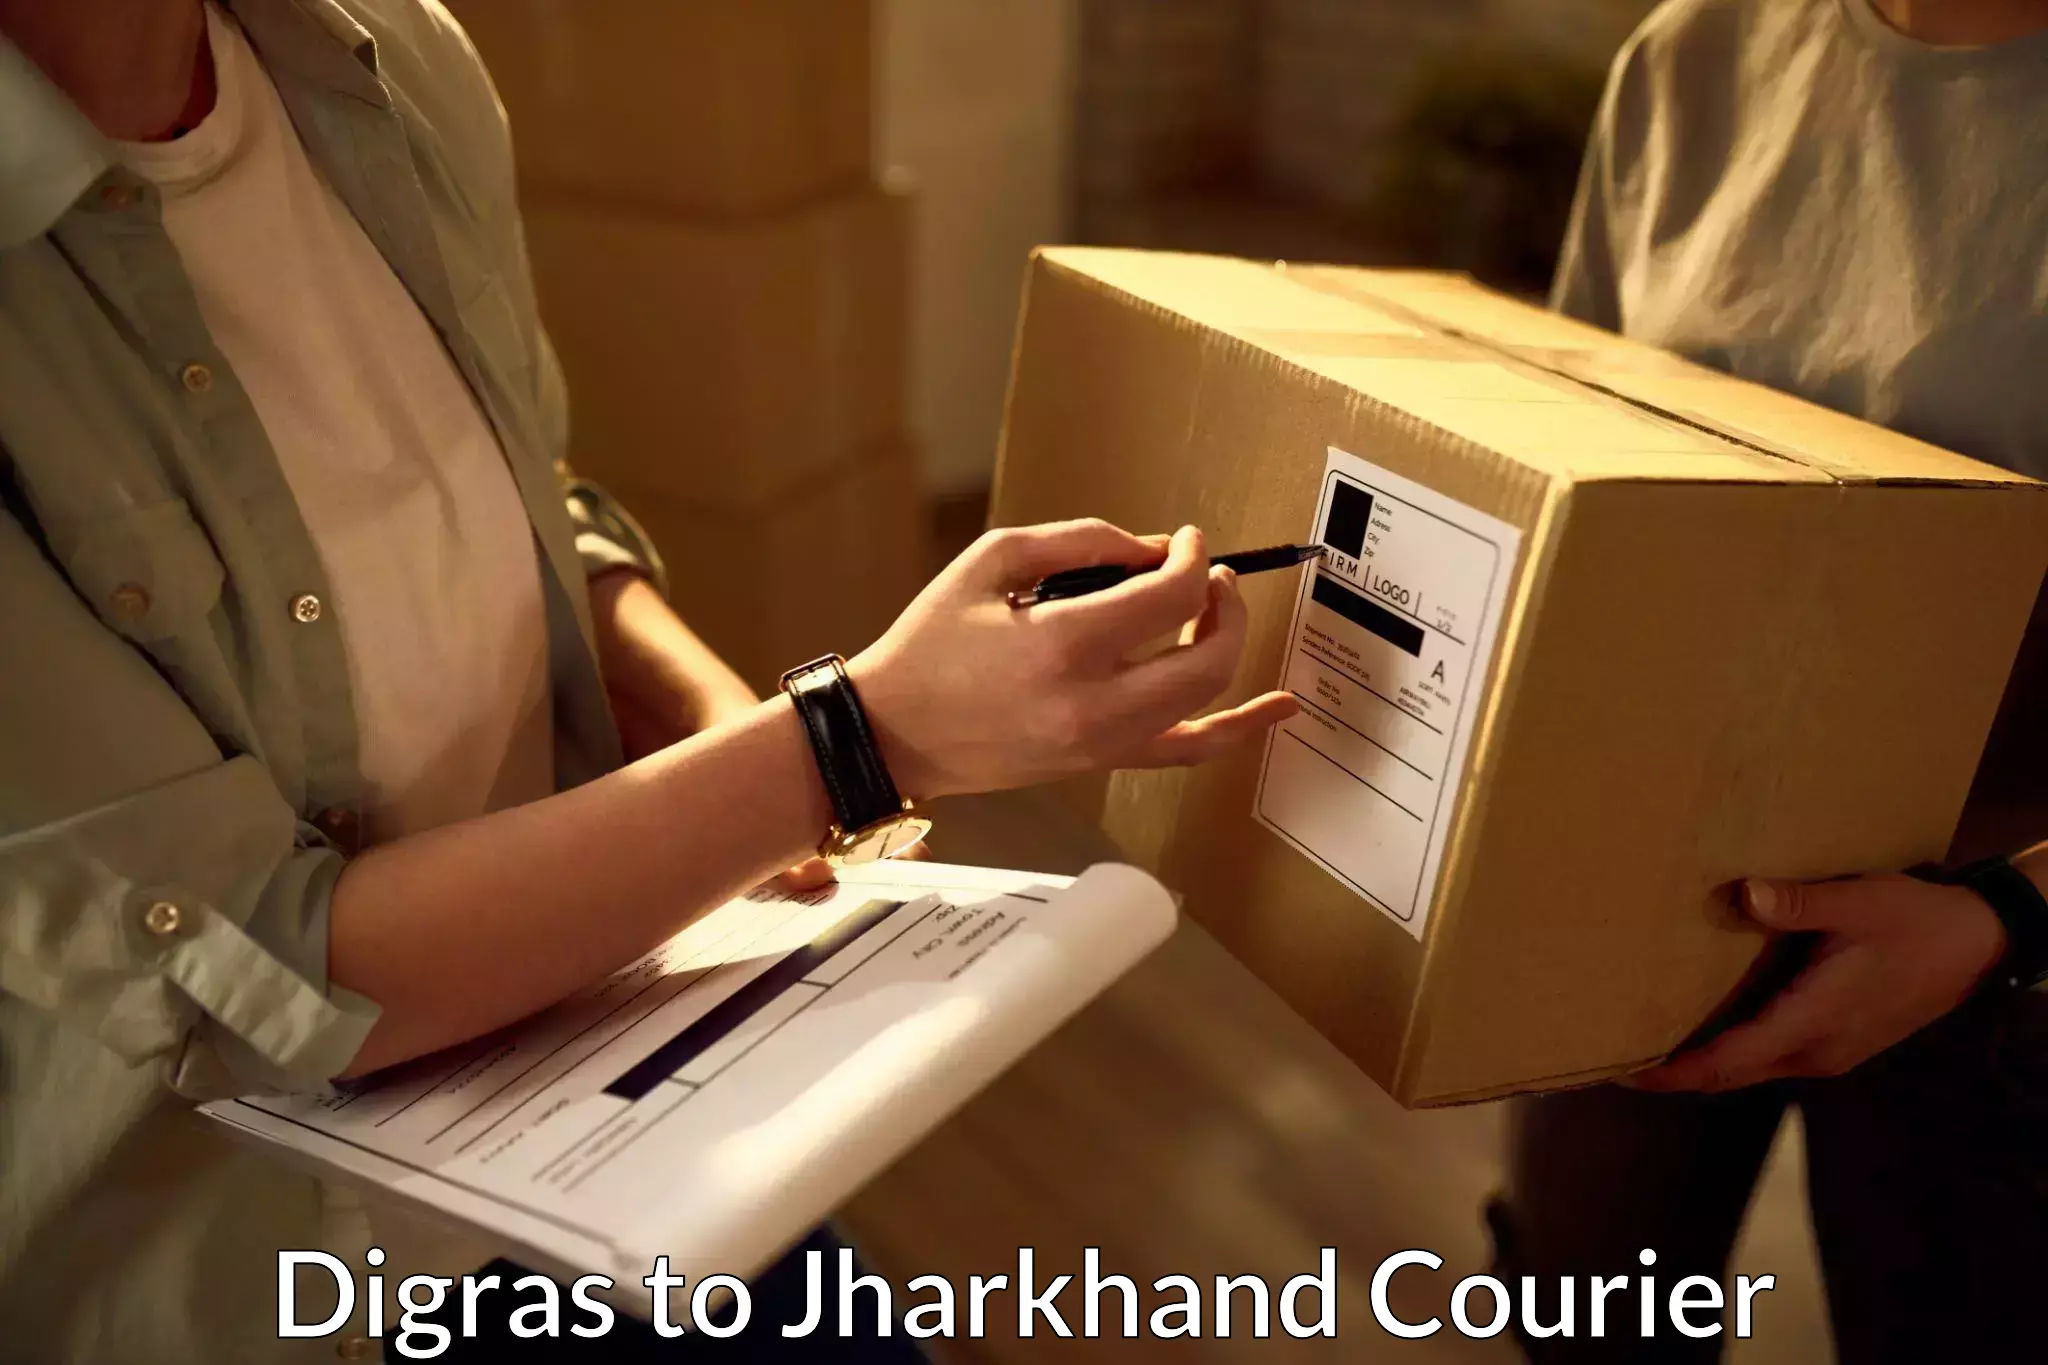 Courier service efficiency Digras to Jharkhand